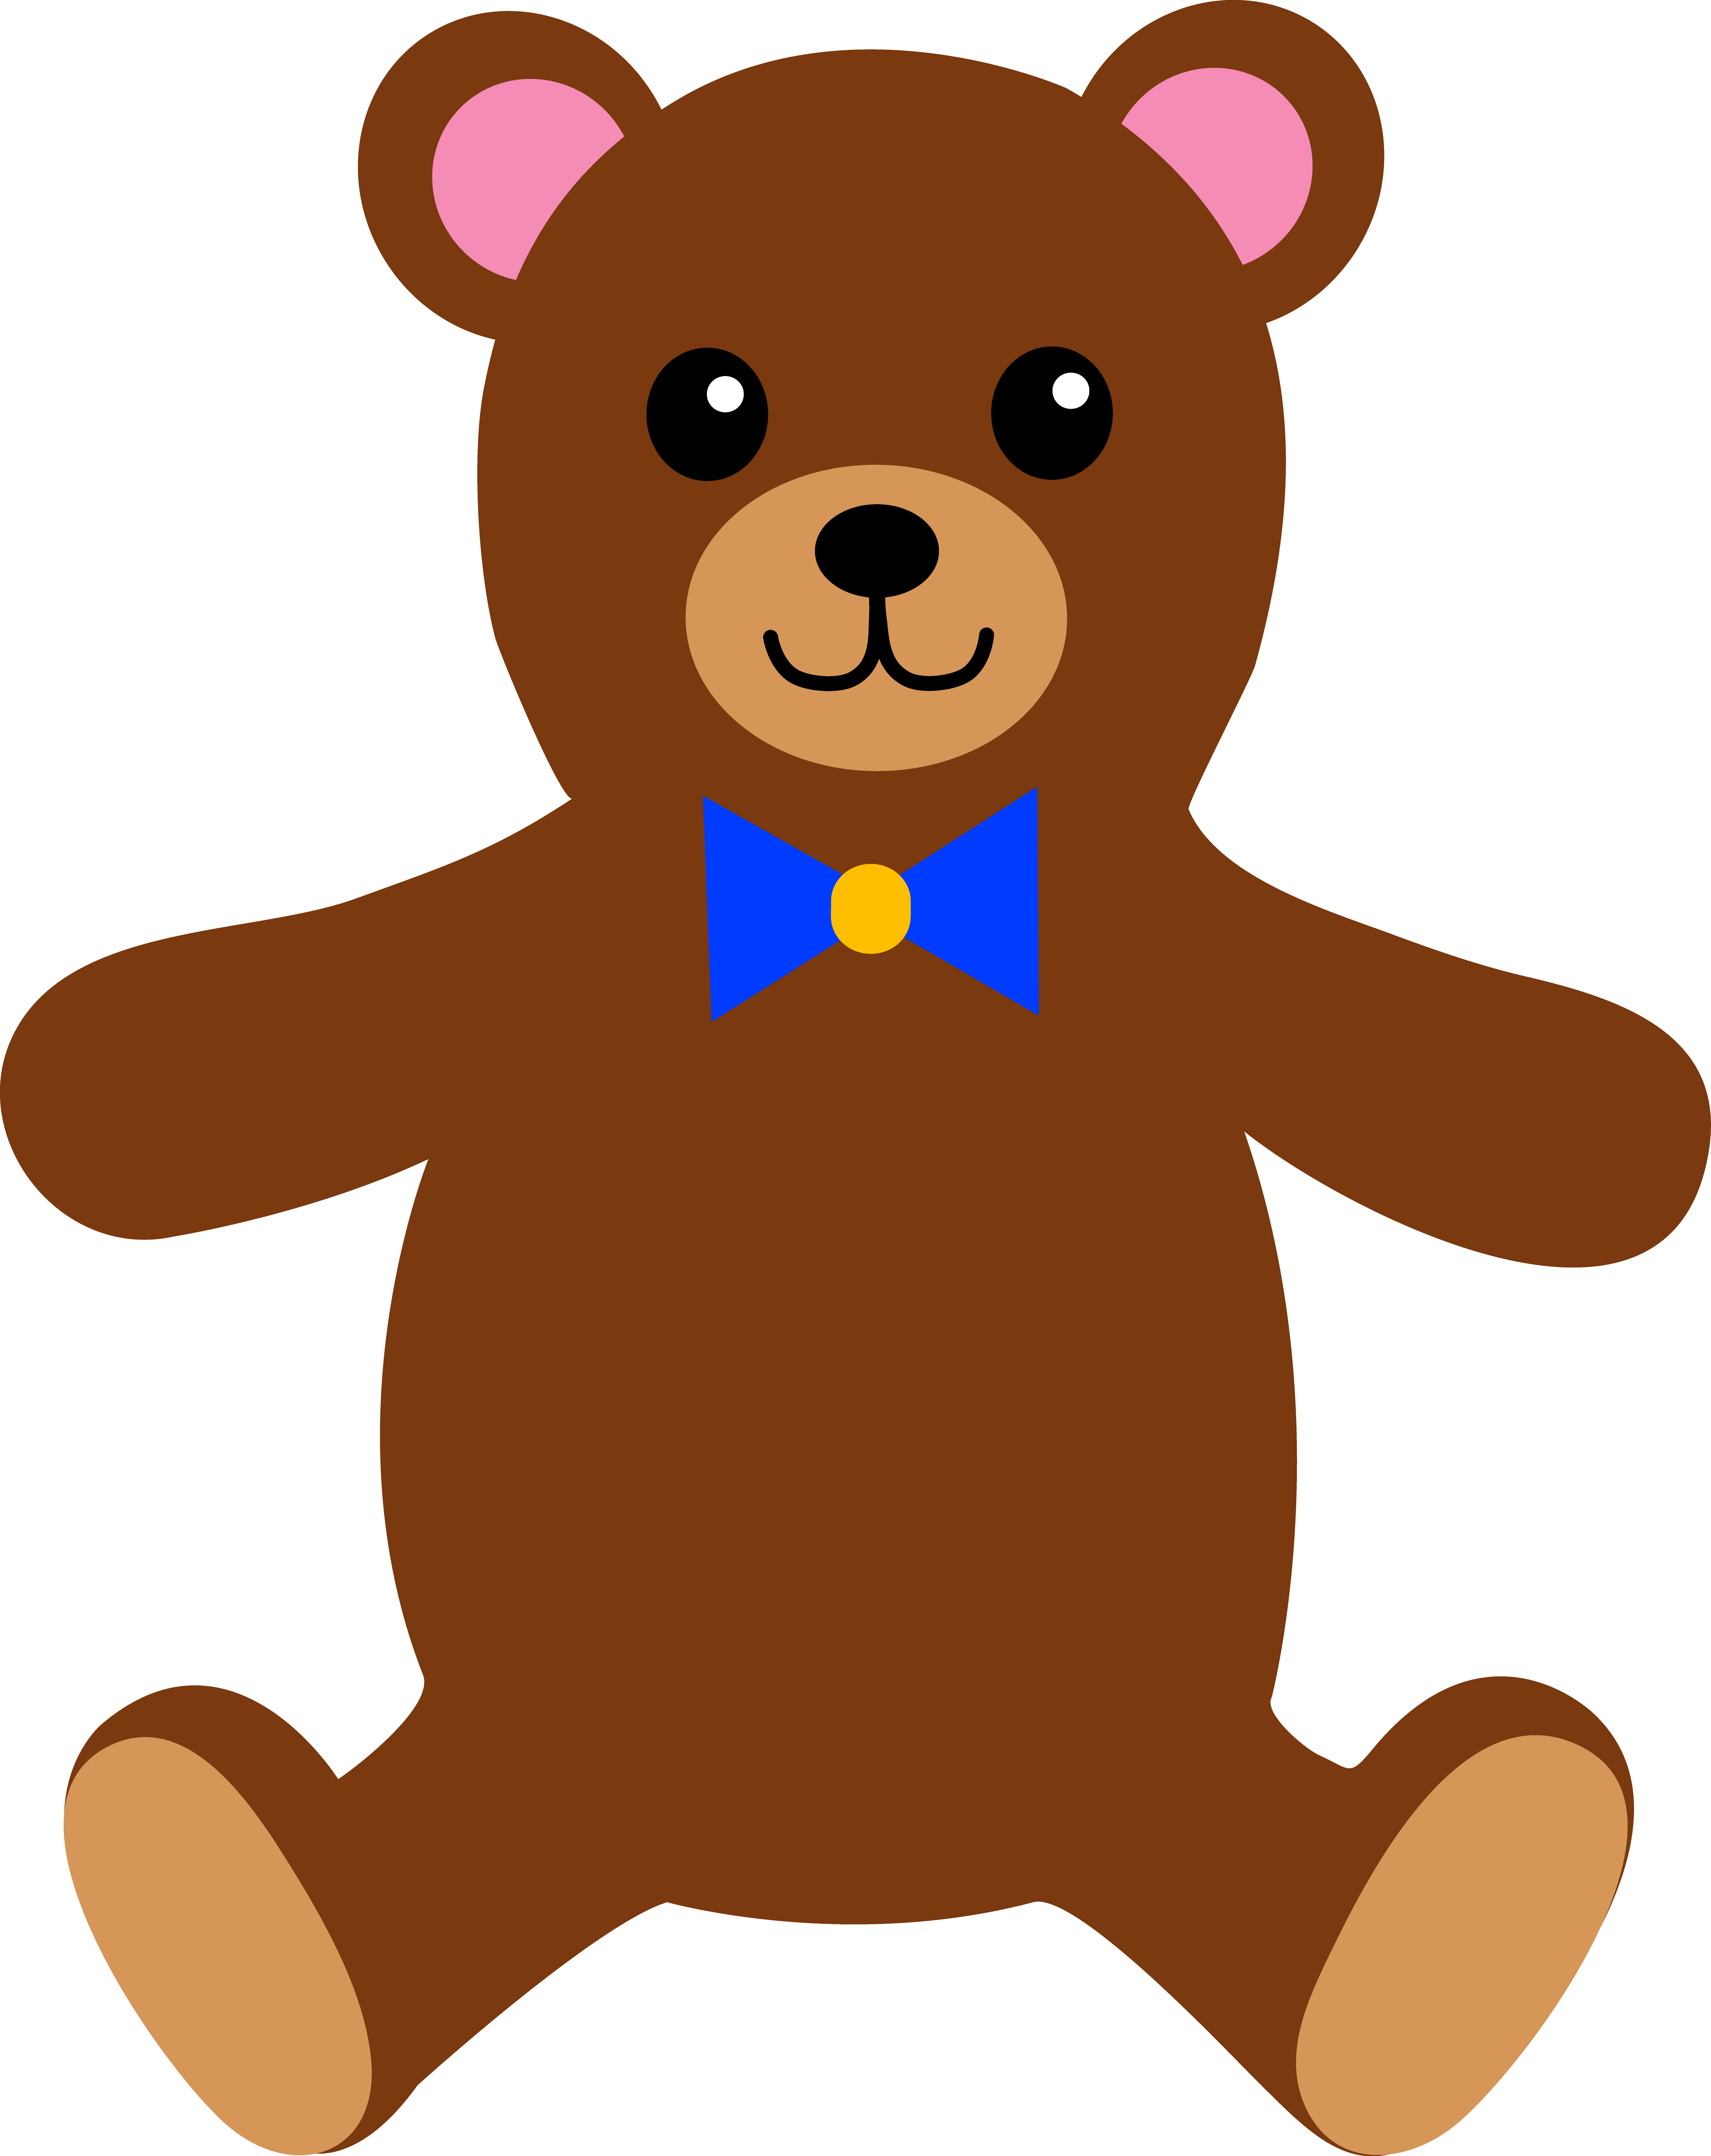 Teddy bear clipart free clipart images 7 clipartcow